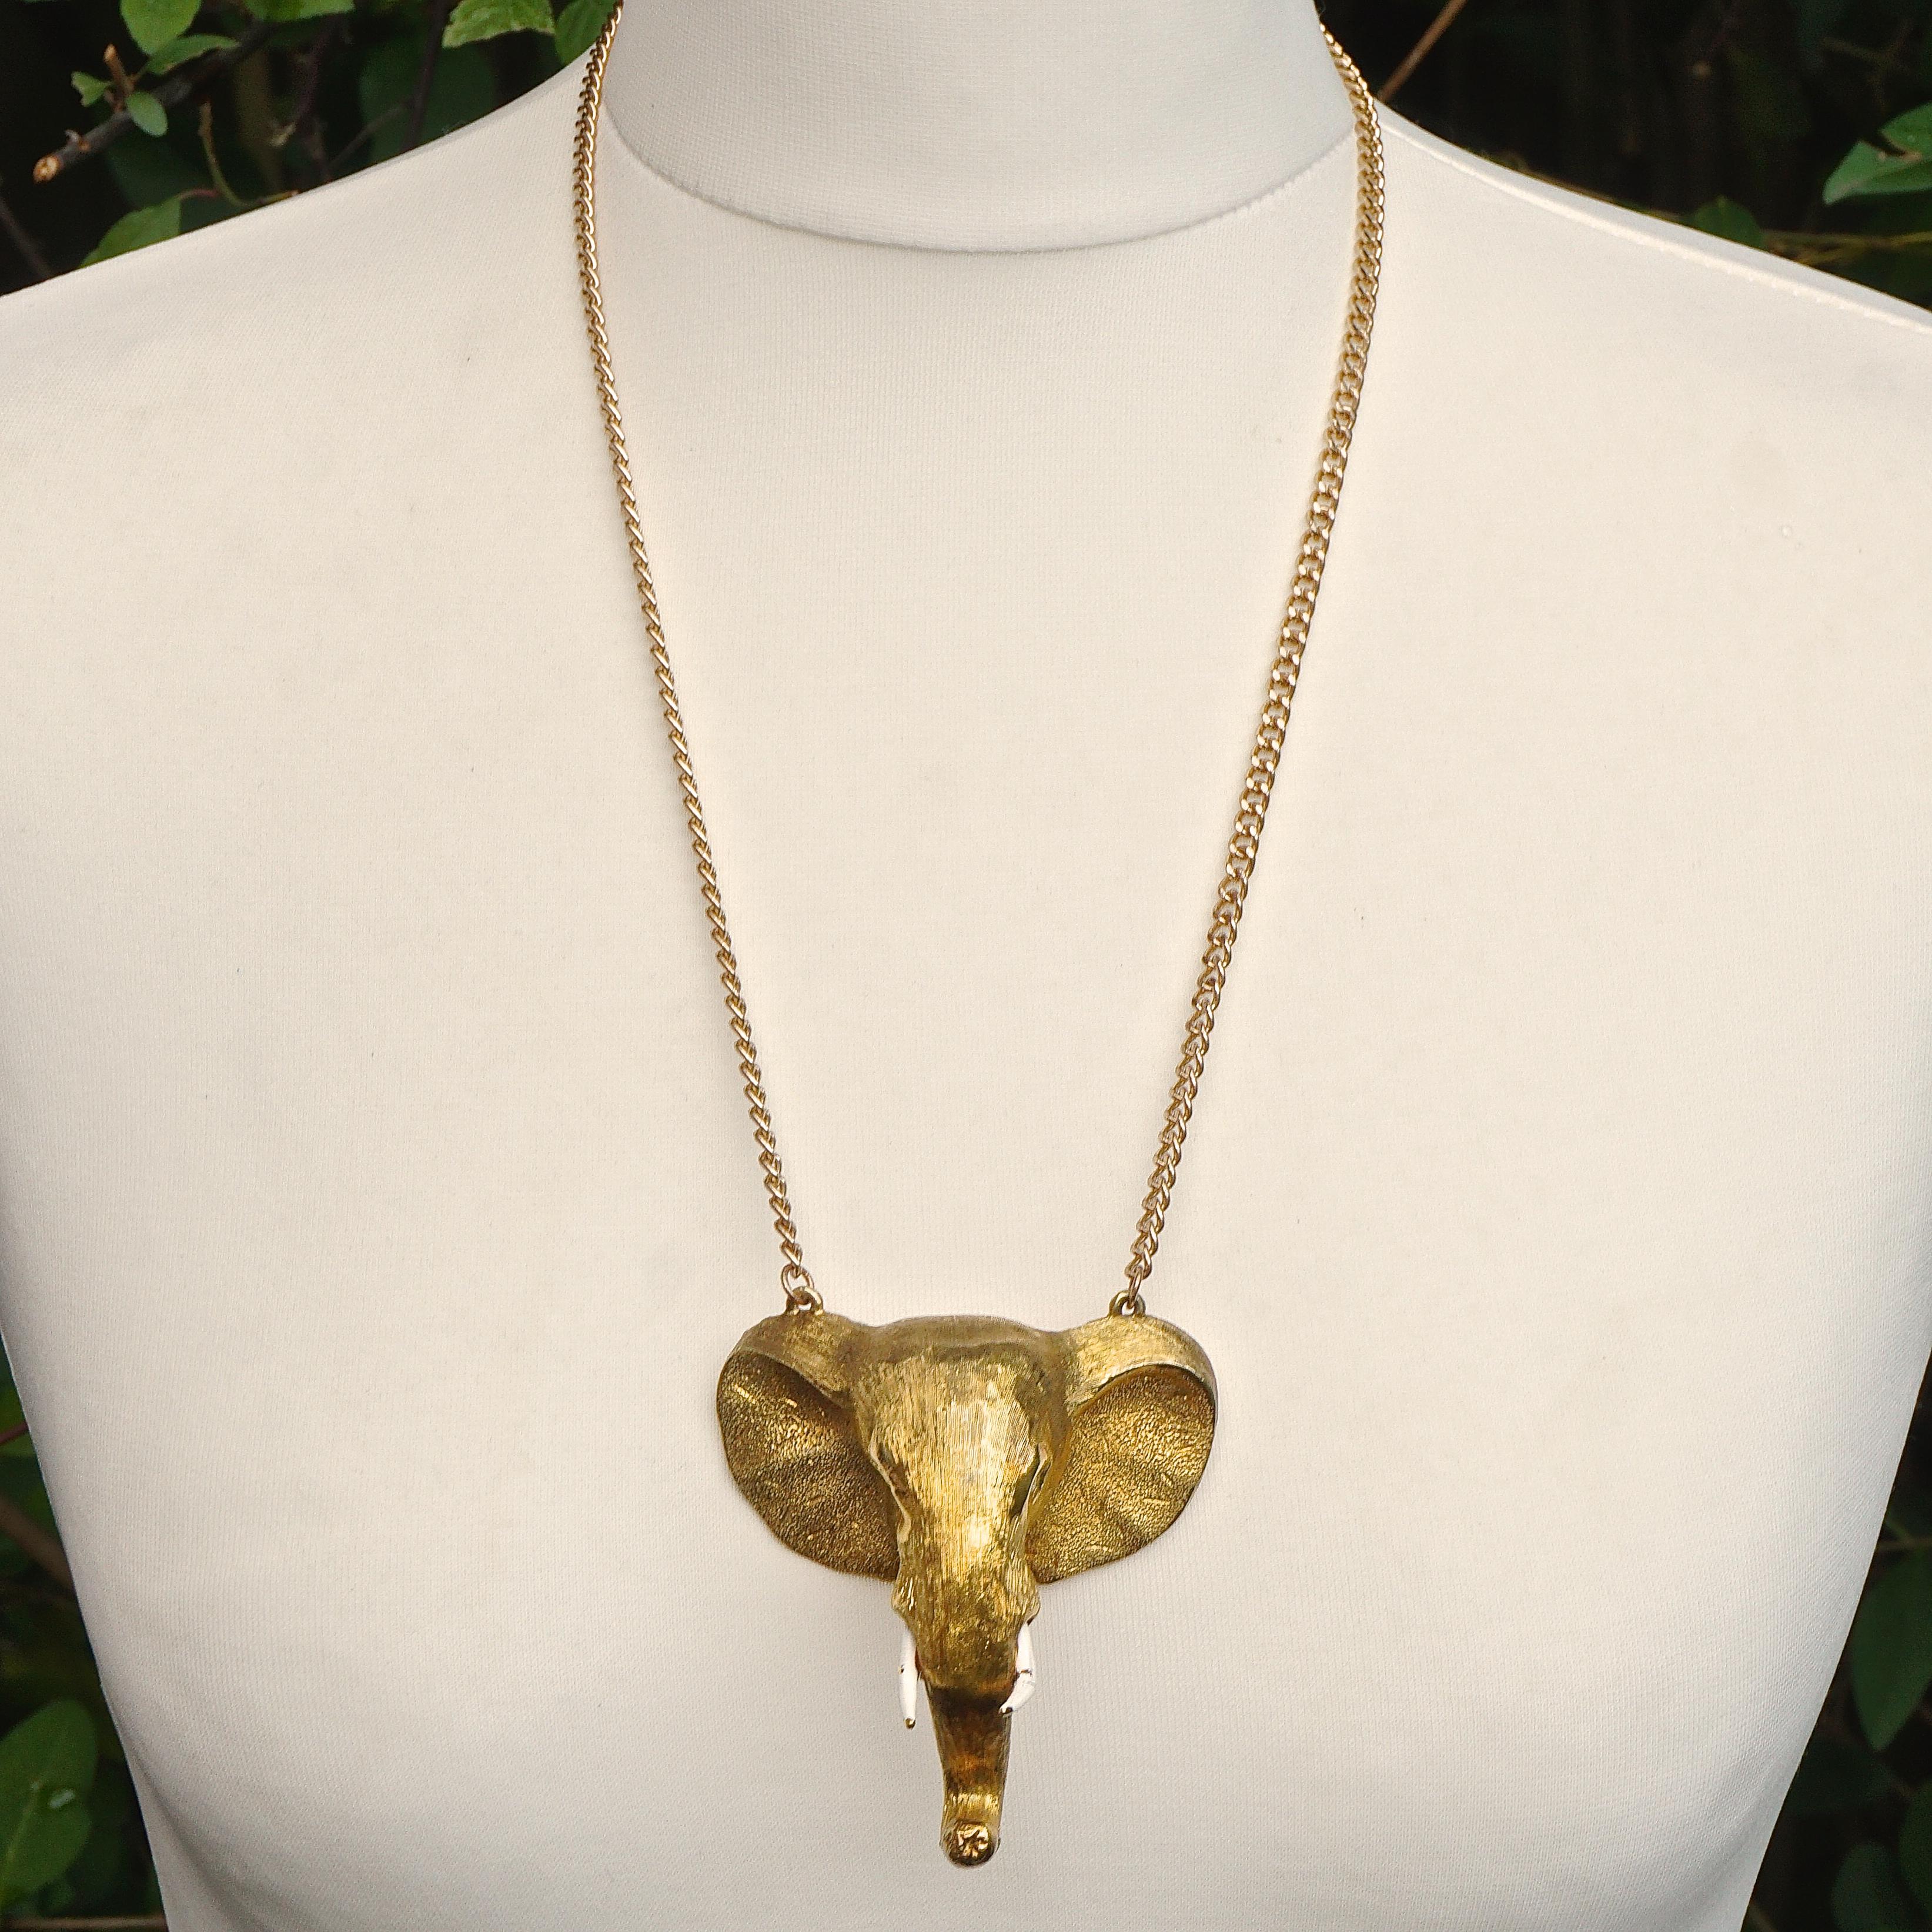 Women's or Men's Gold Plated Elephant Head Pendant Necklace Brooch with Crystal Eyes Enamel Tusks